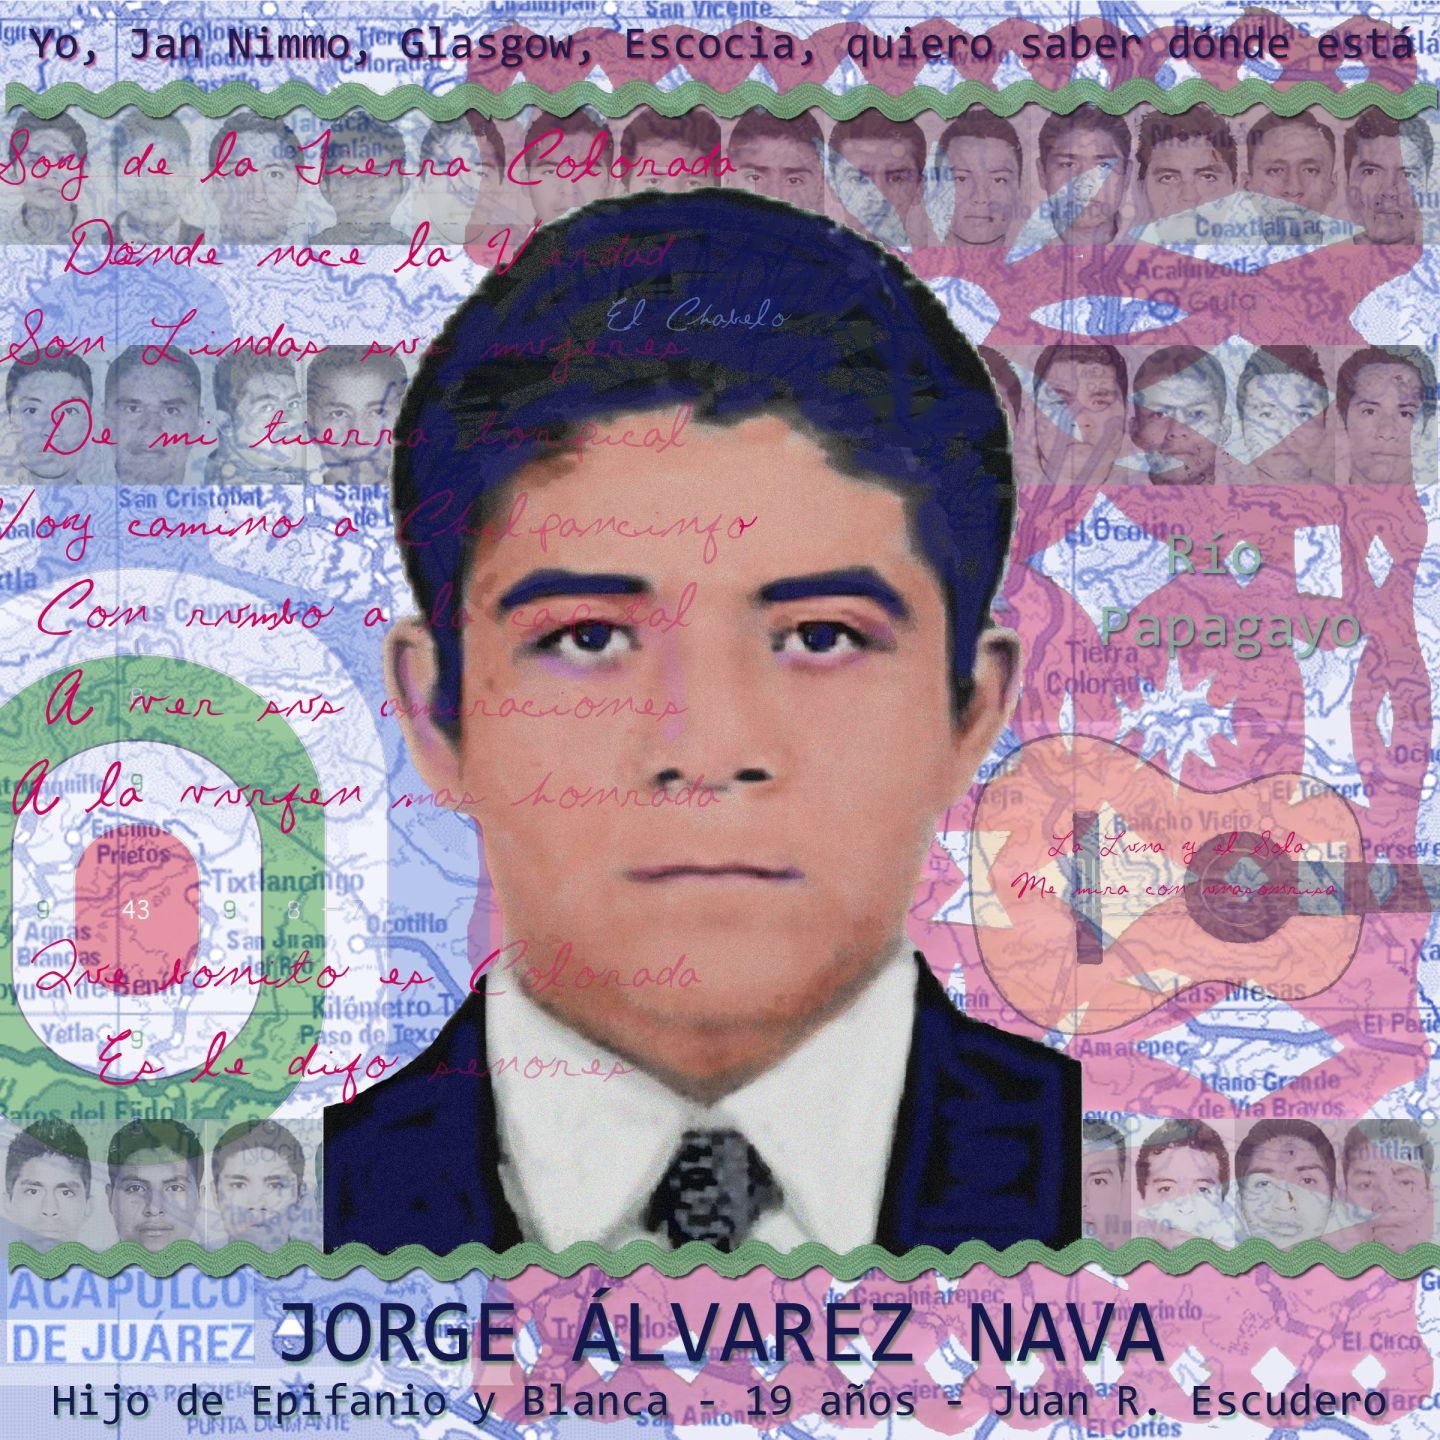 A tribute to Mexico's disappeared amidst demands for the truth 29